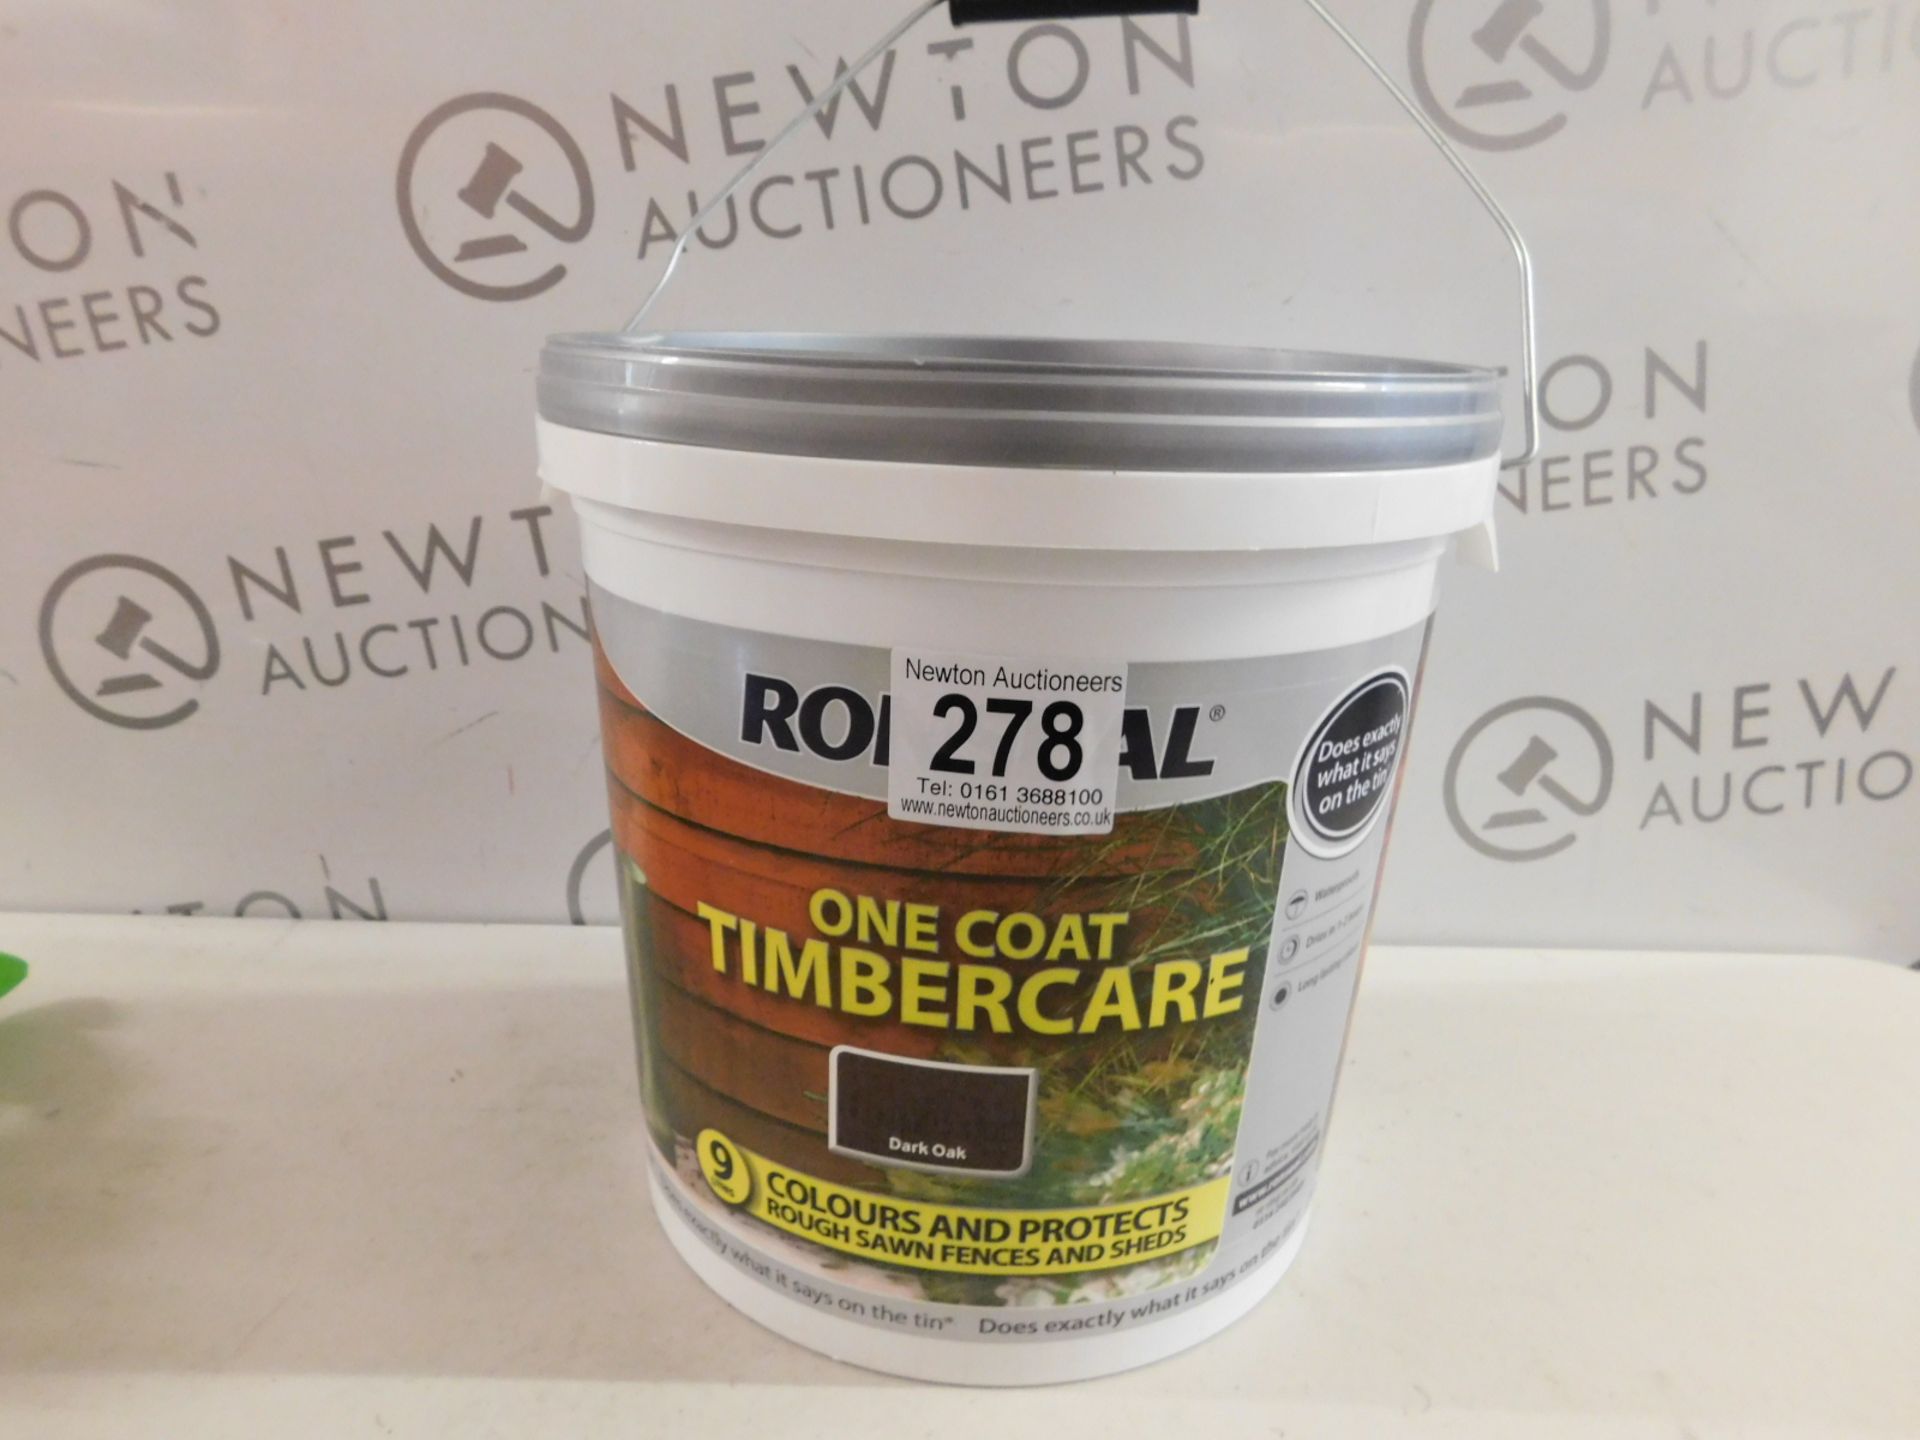 1 BRAND NEW TUB OF RONSEAL ONE COAT TIMBERCARE DARK OAK 9 LITRES RRP £12.99